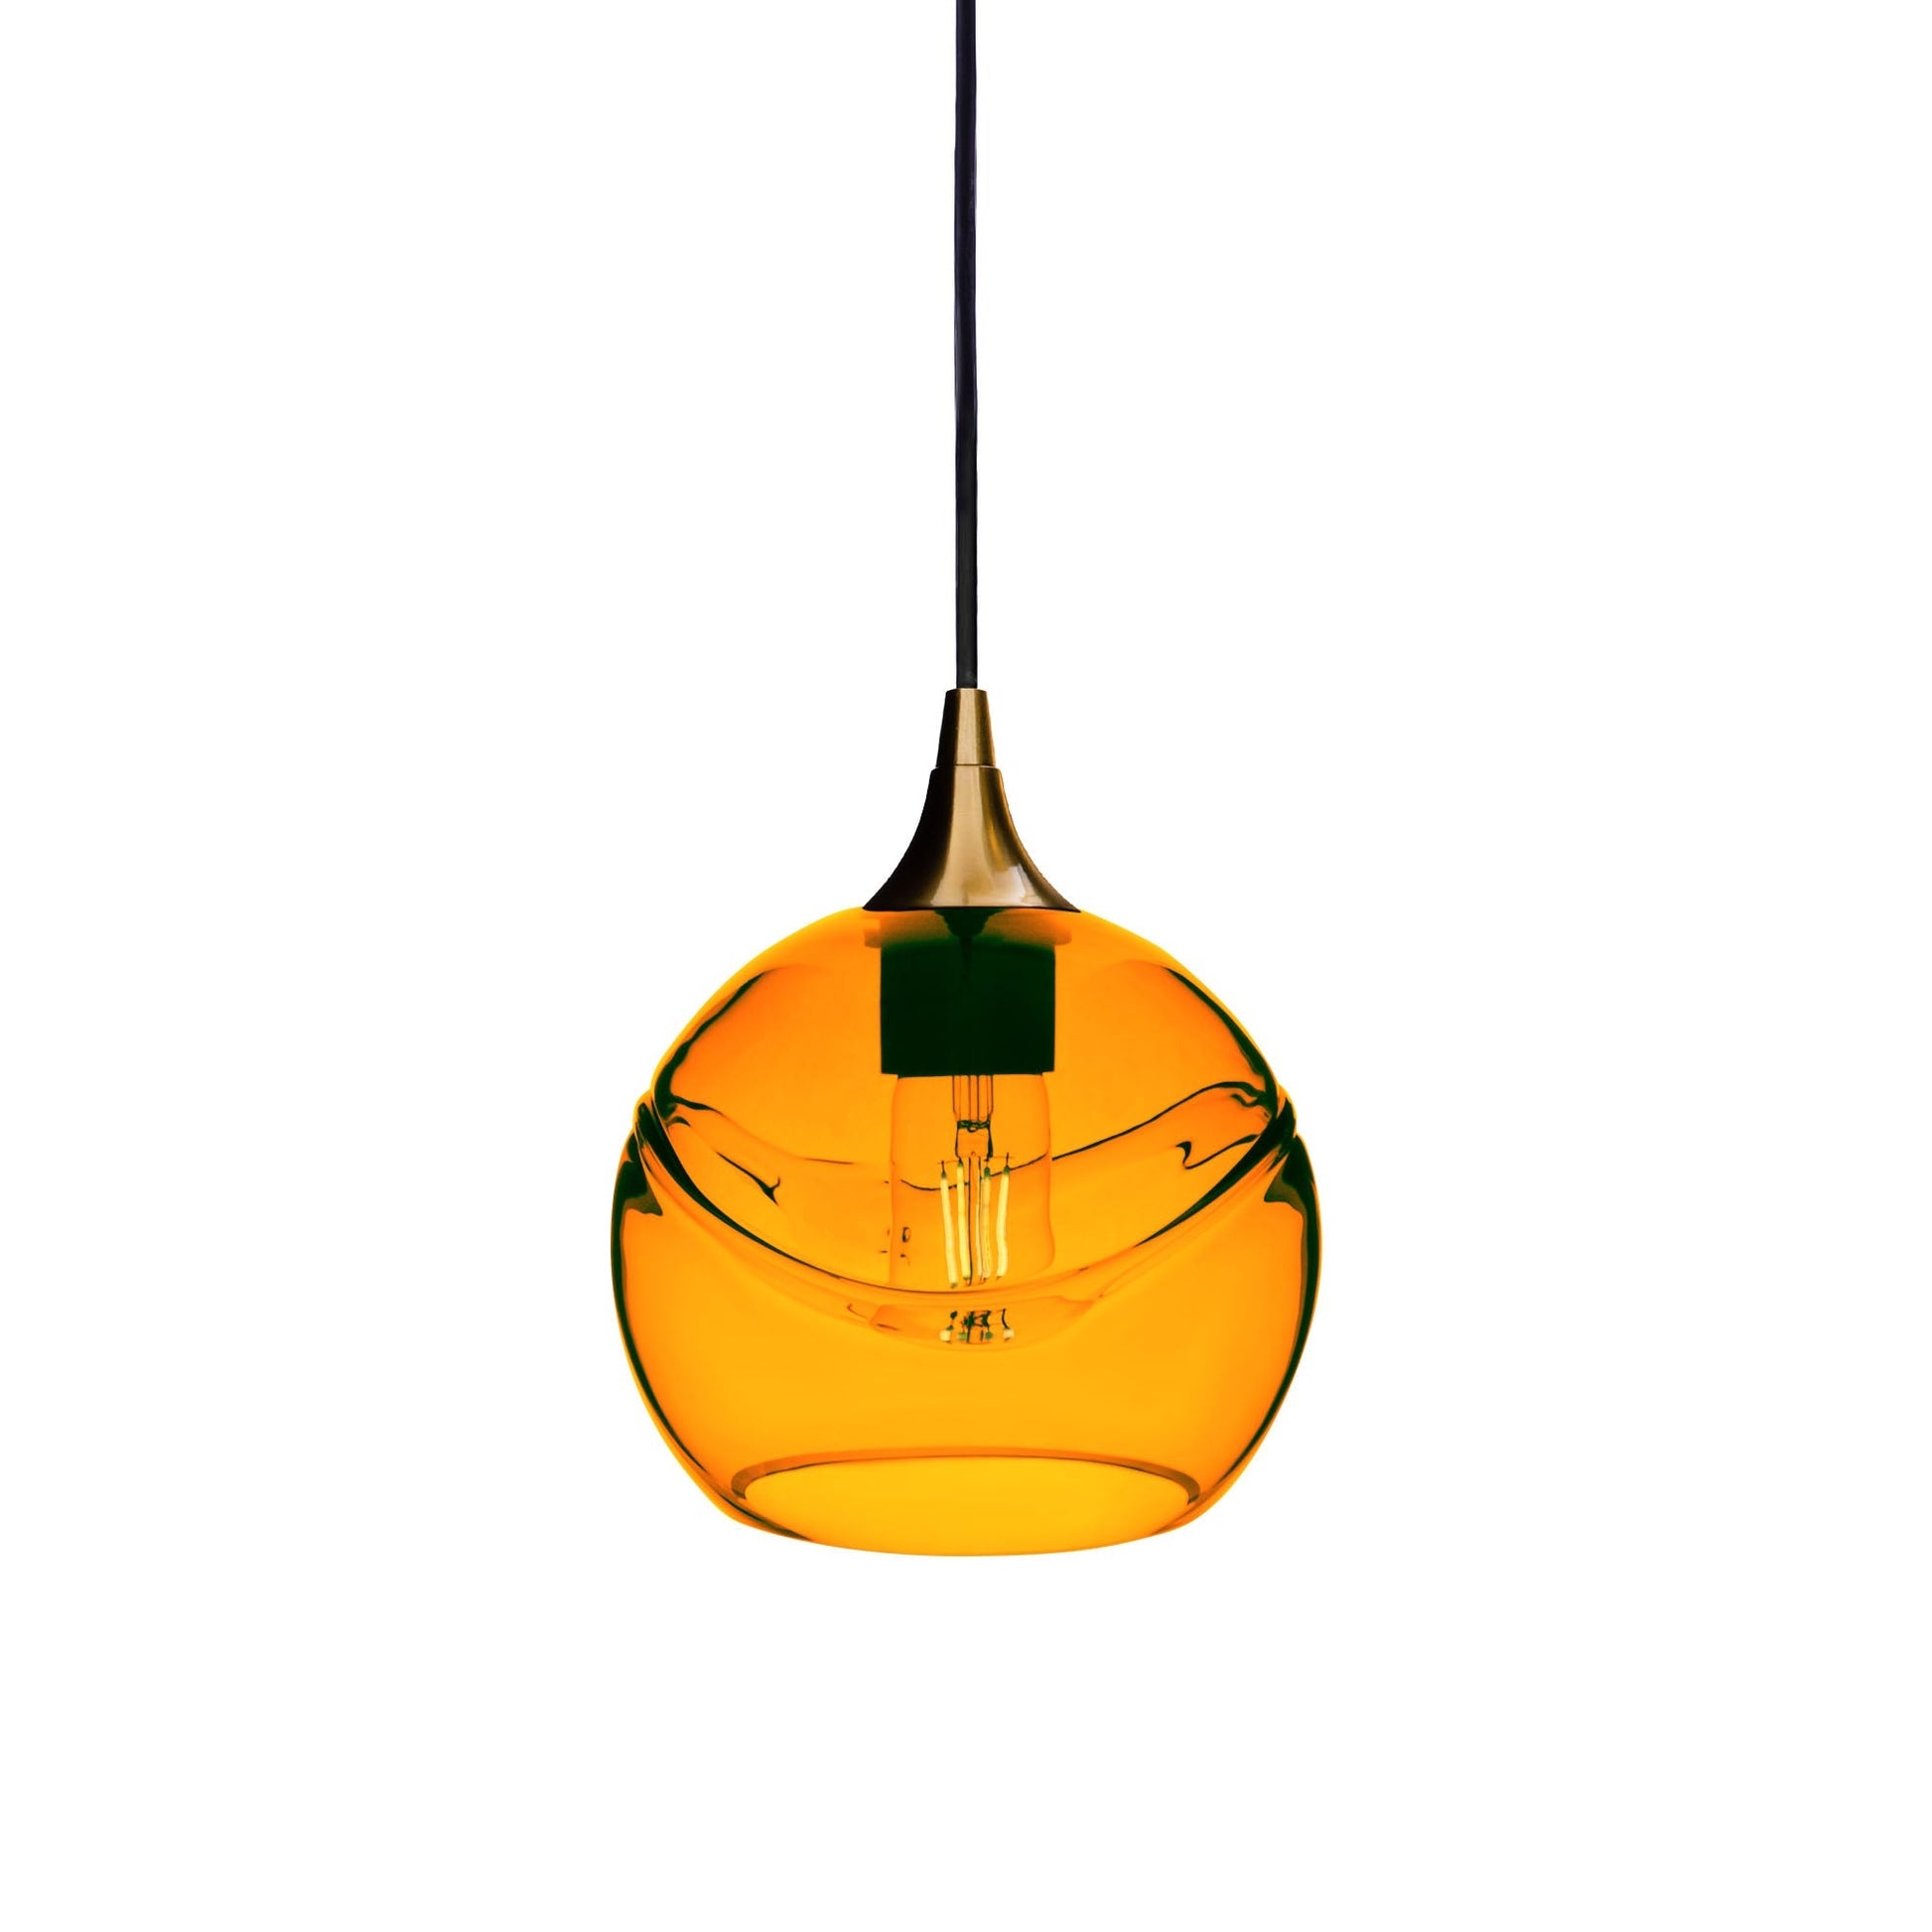 767 Swell: Single Pendant Light-Glass-Bicycle Glass Co - Hotshop-Harvest Gold-Polished Brass-Bicycle Glass Co